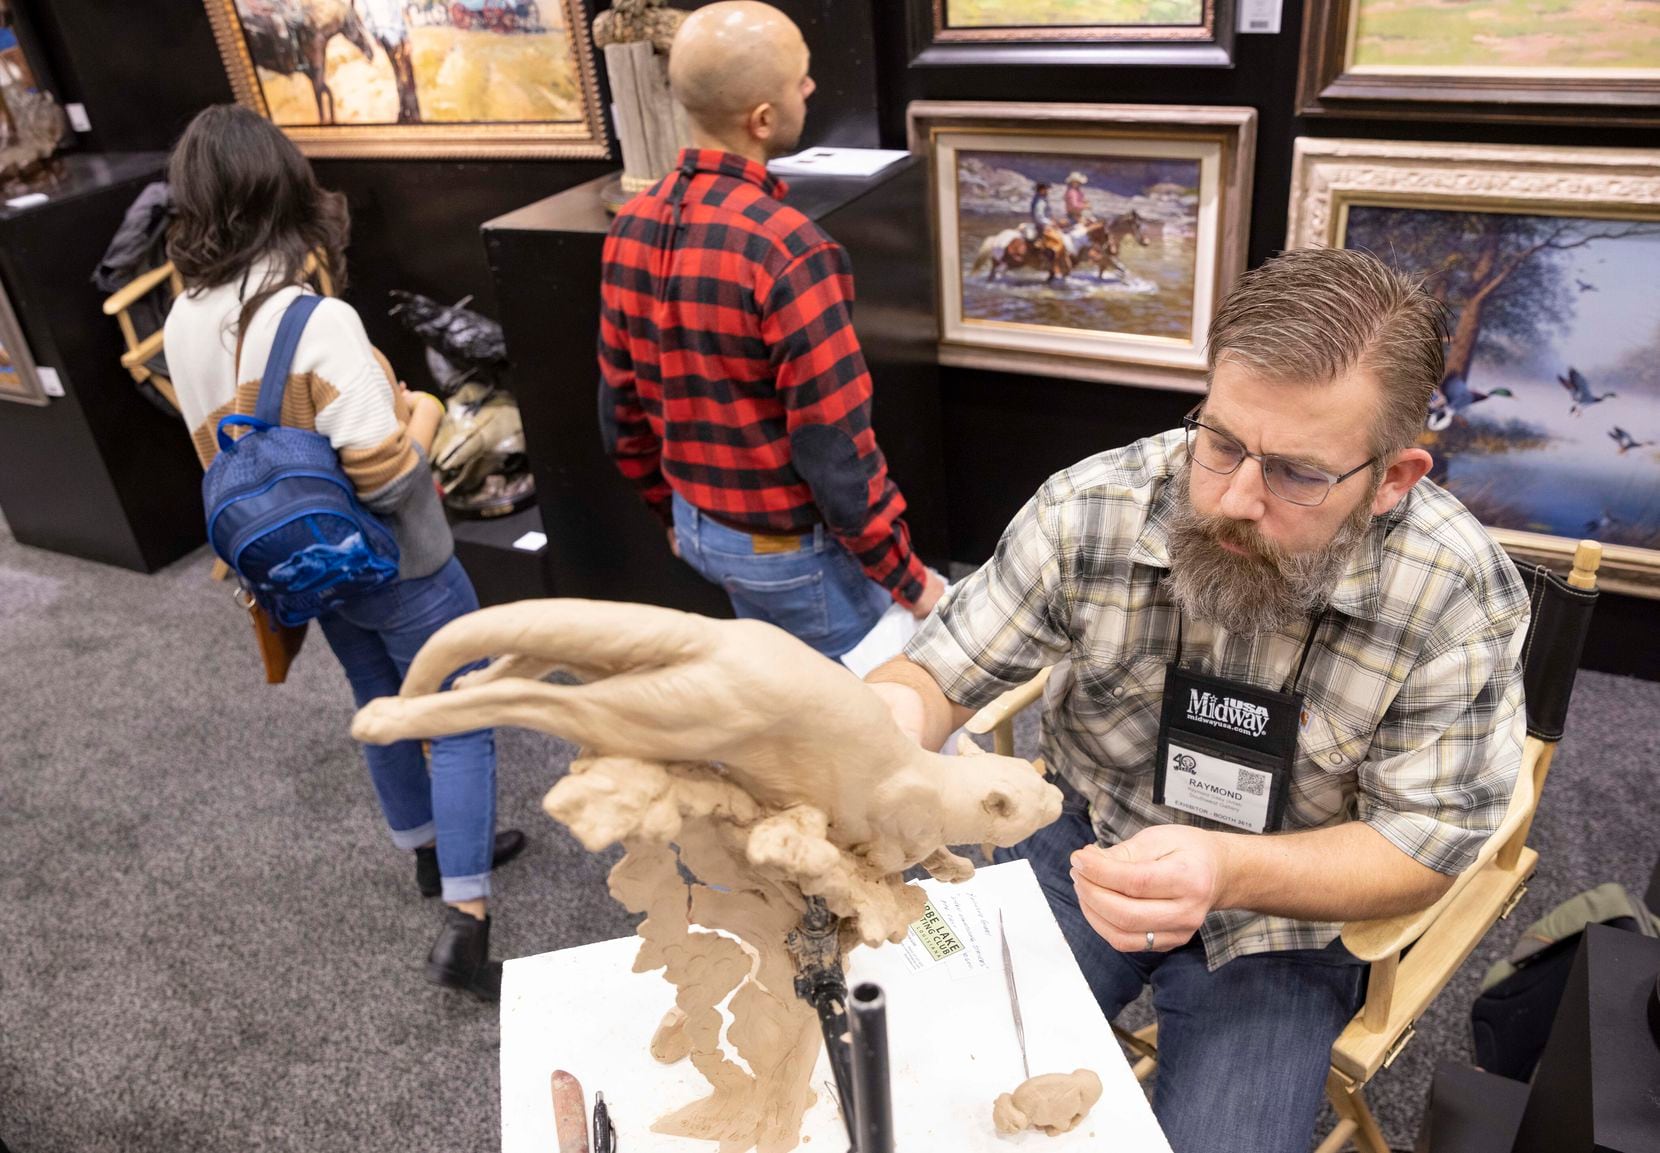 Raymond Gibby of Utah works on a sculpture as people browse the Southwest Gallery booth...